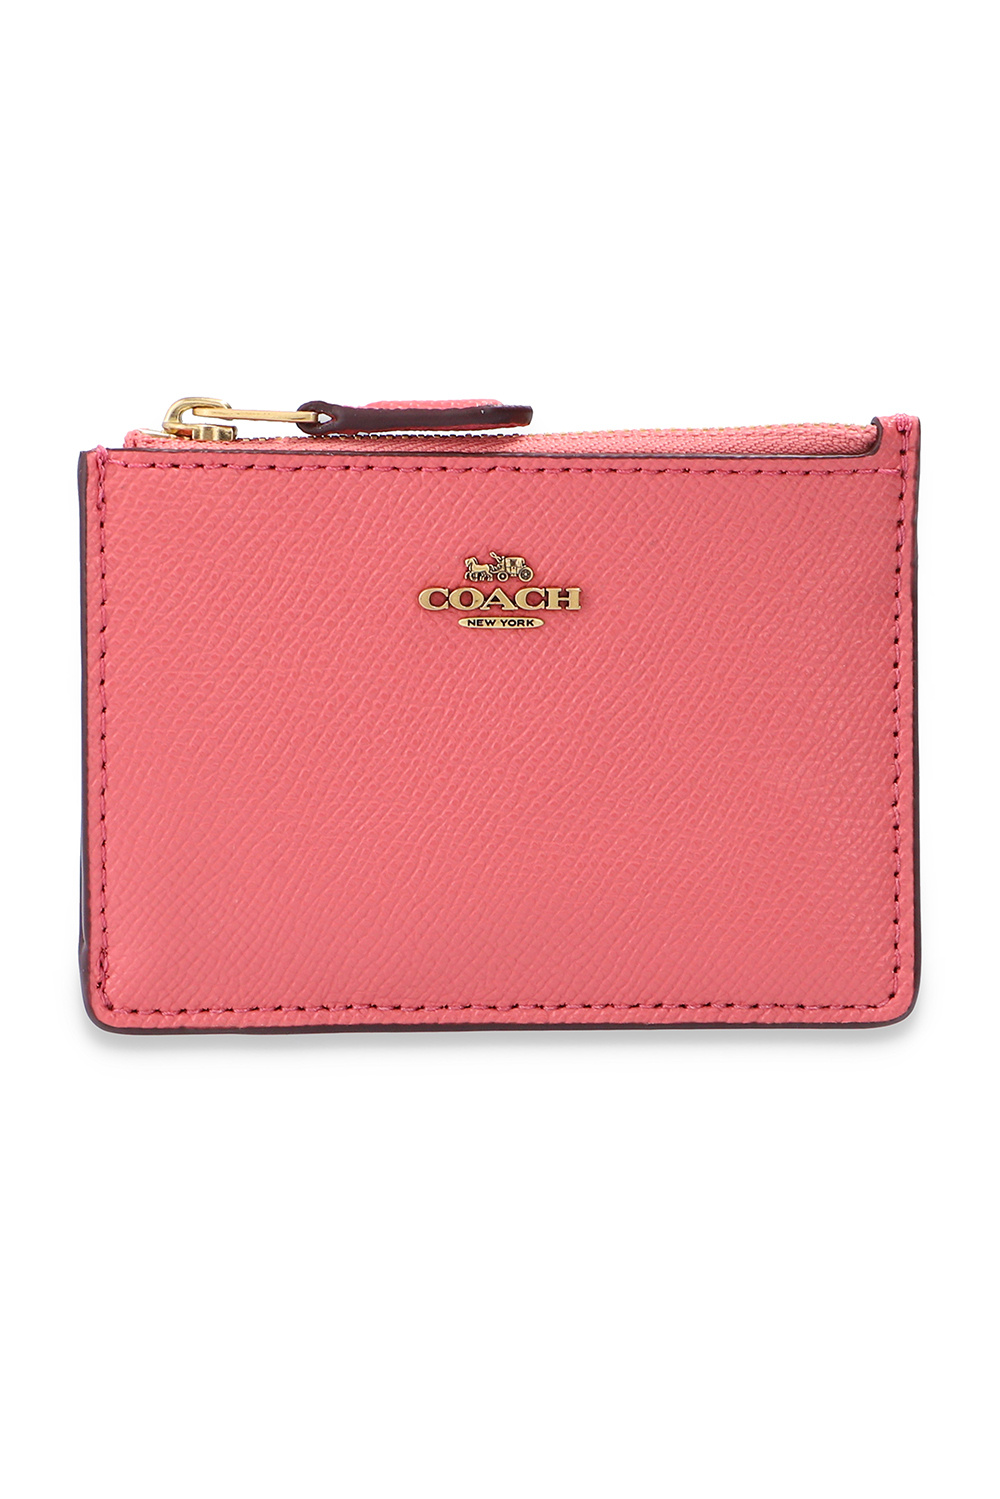 Coach Card holder with logo, Women's Accessories